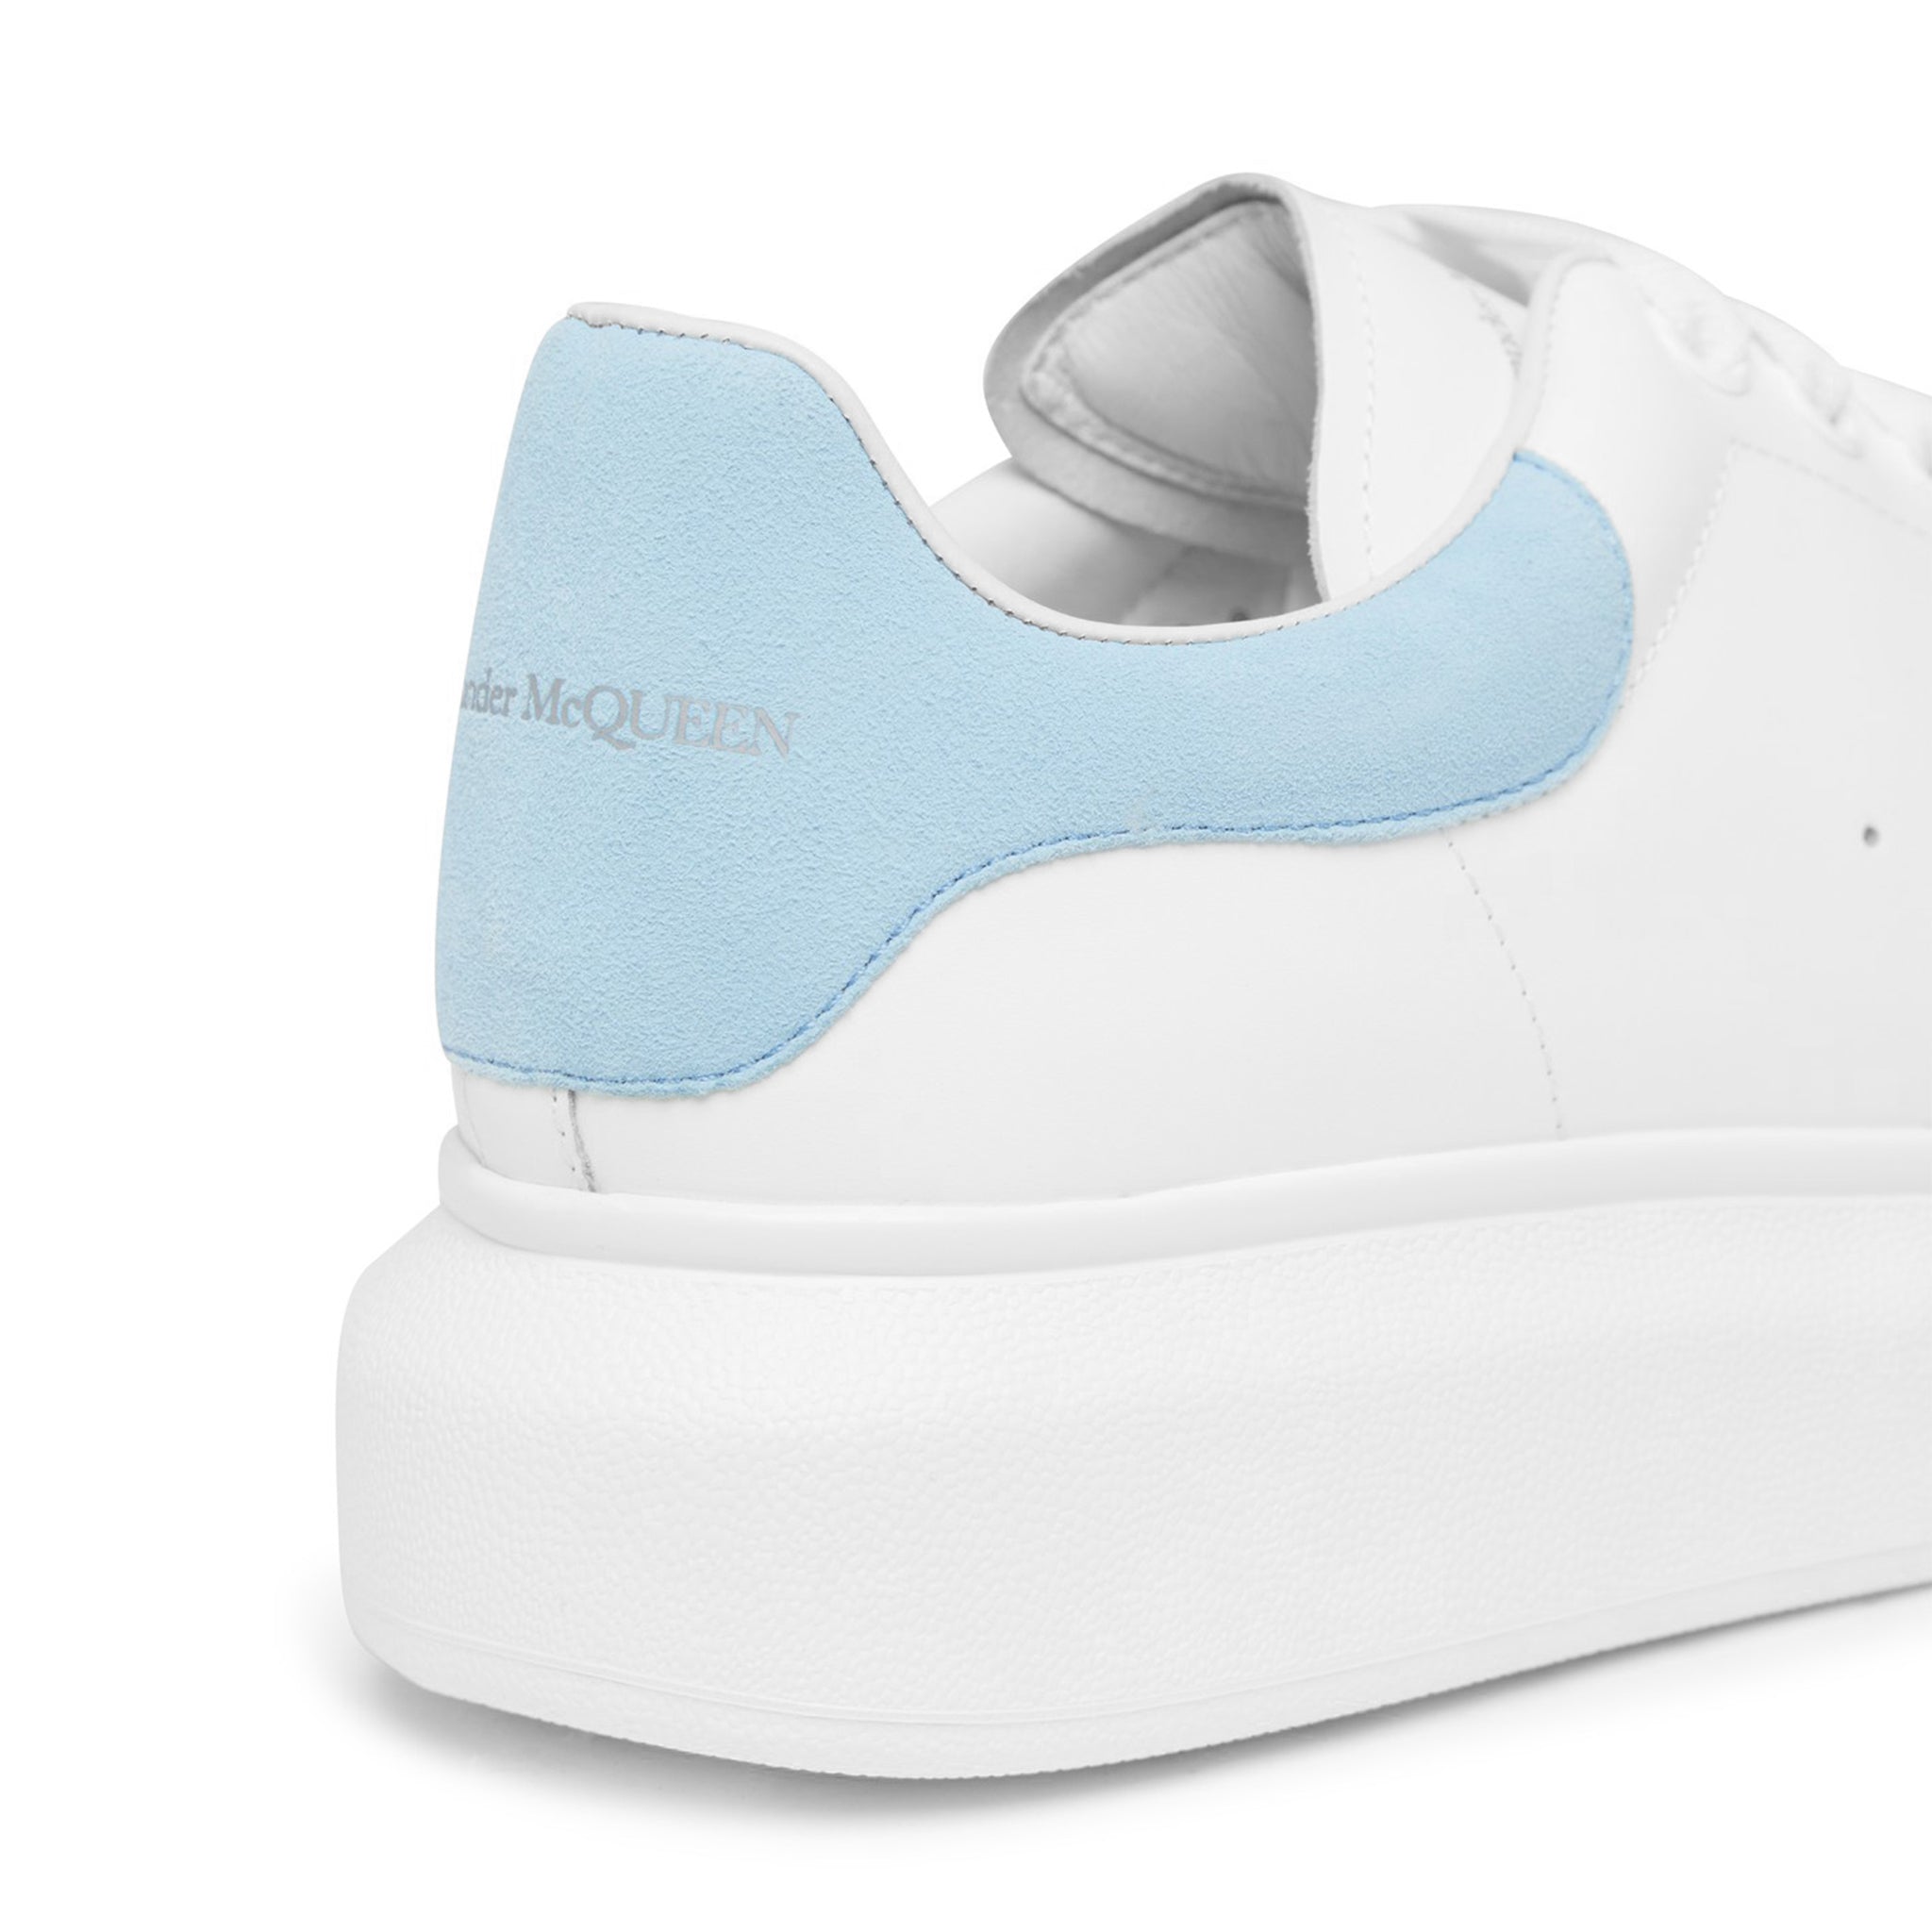 Back detail view of Alexander Mcqueen Raised Sole White Blue Sneaker